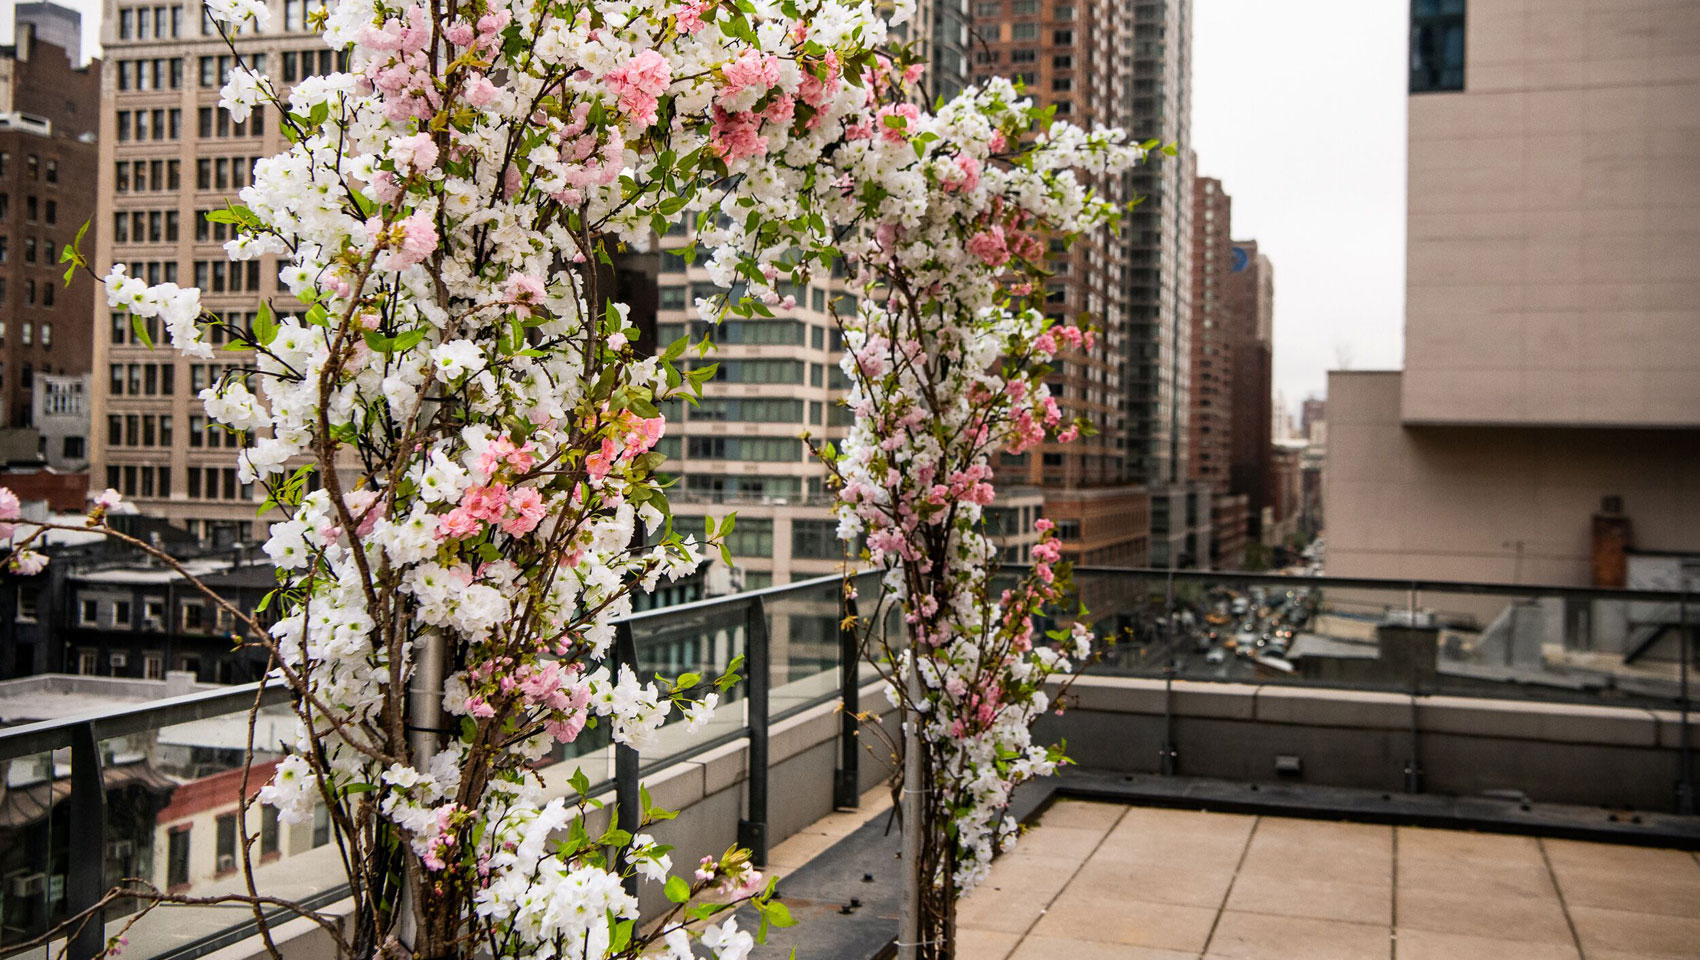 Floral wedding arch on top of balcony overlooking city views